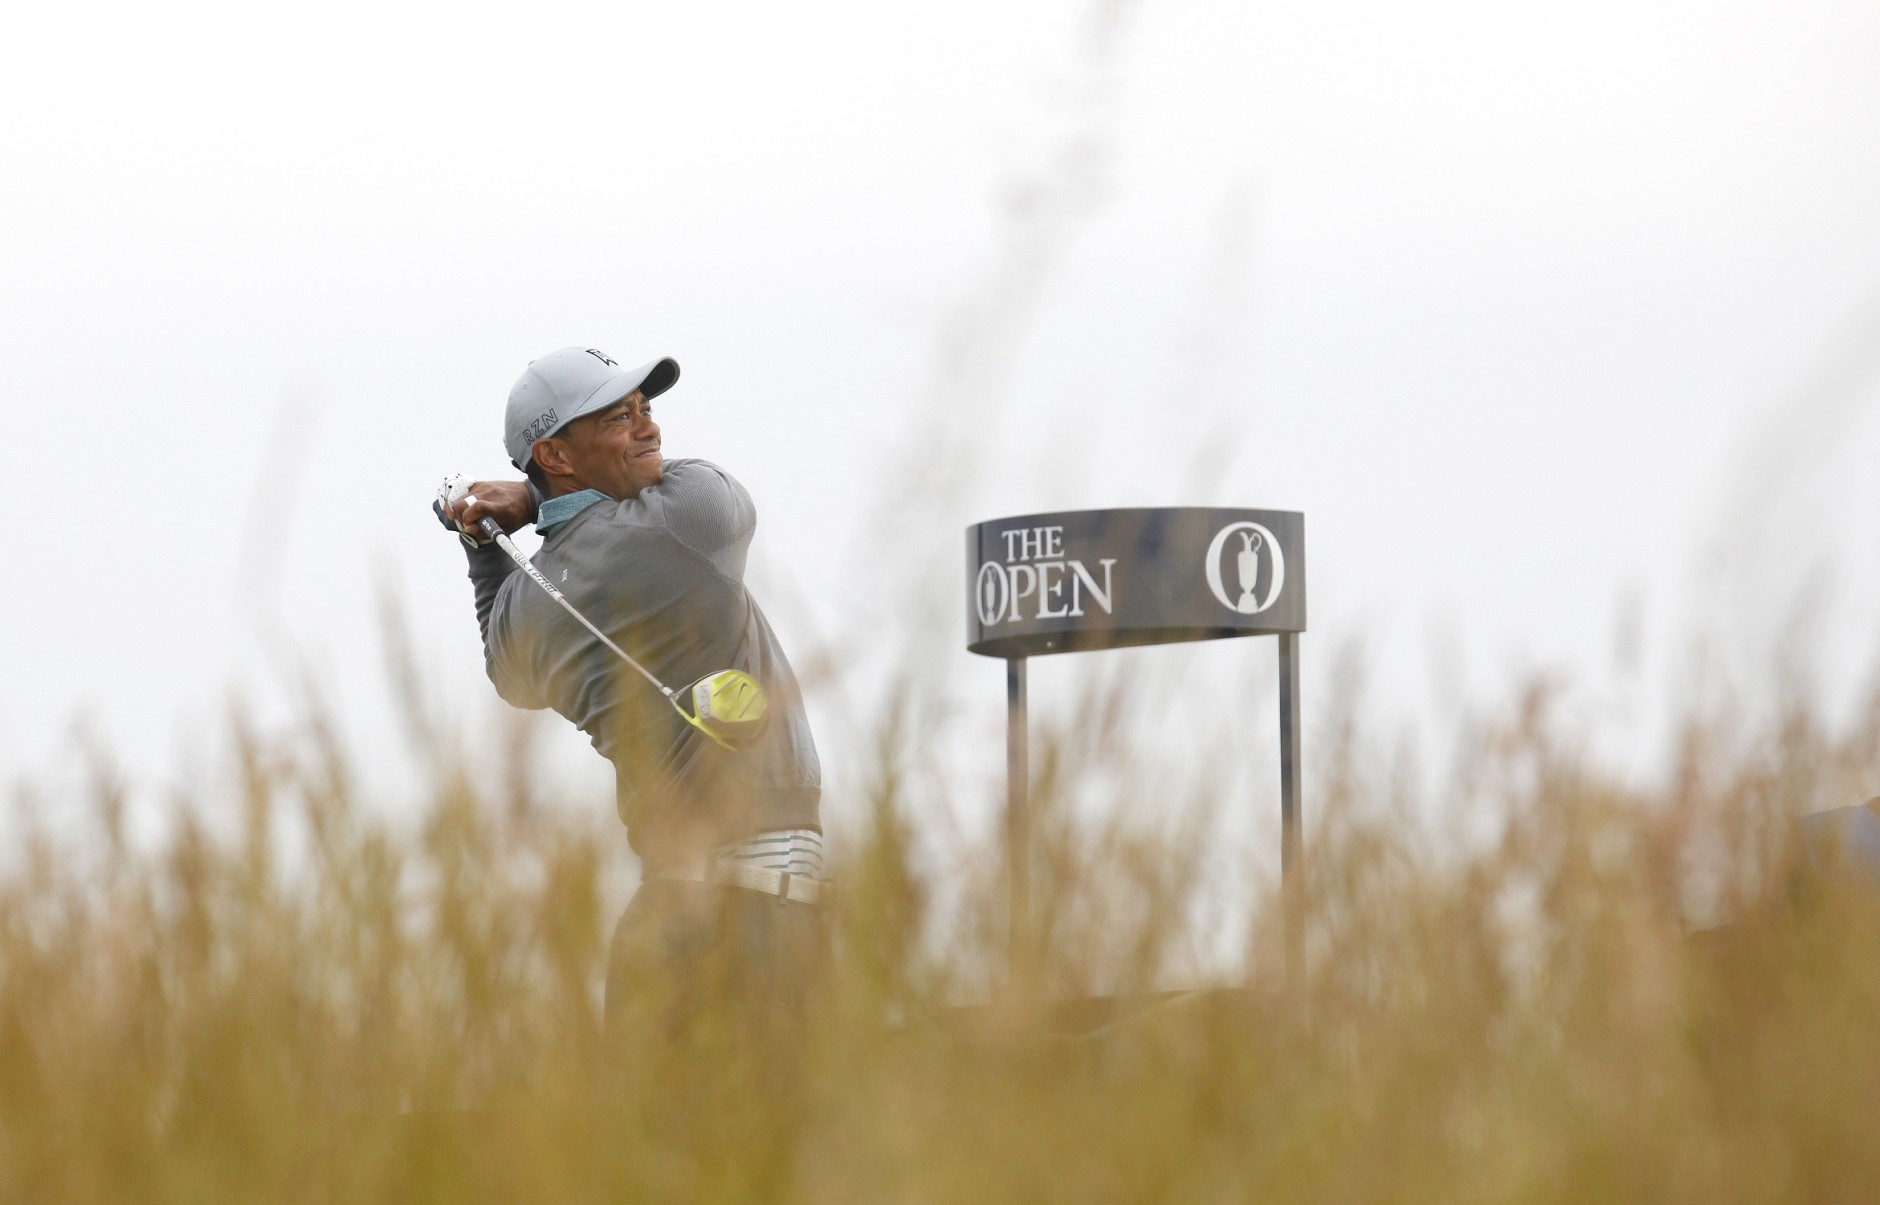 Tiger Woods from the U.S. tees off the 6th hole during a practice round at St. Andrews Golf Club prior to the start of the British Open Golf Championship, in St. Andrews, Scotland, Monday, July 13, 2015. (AP Photo/Peter Morrison)